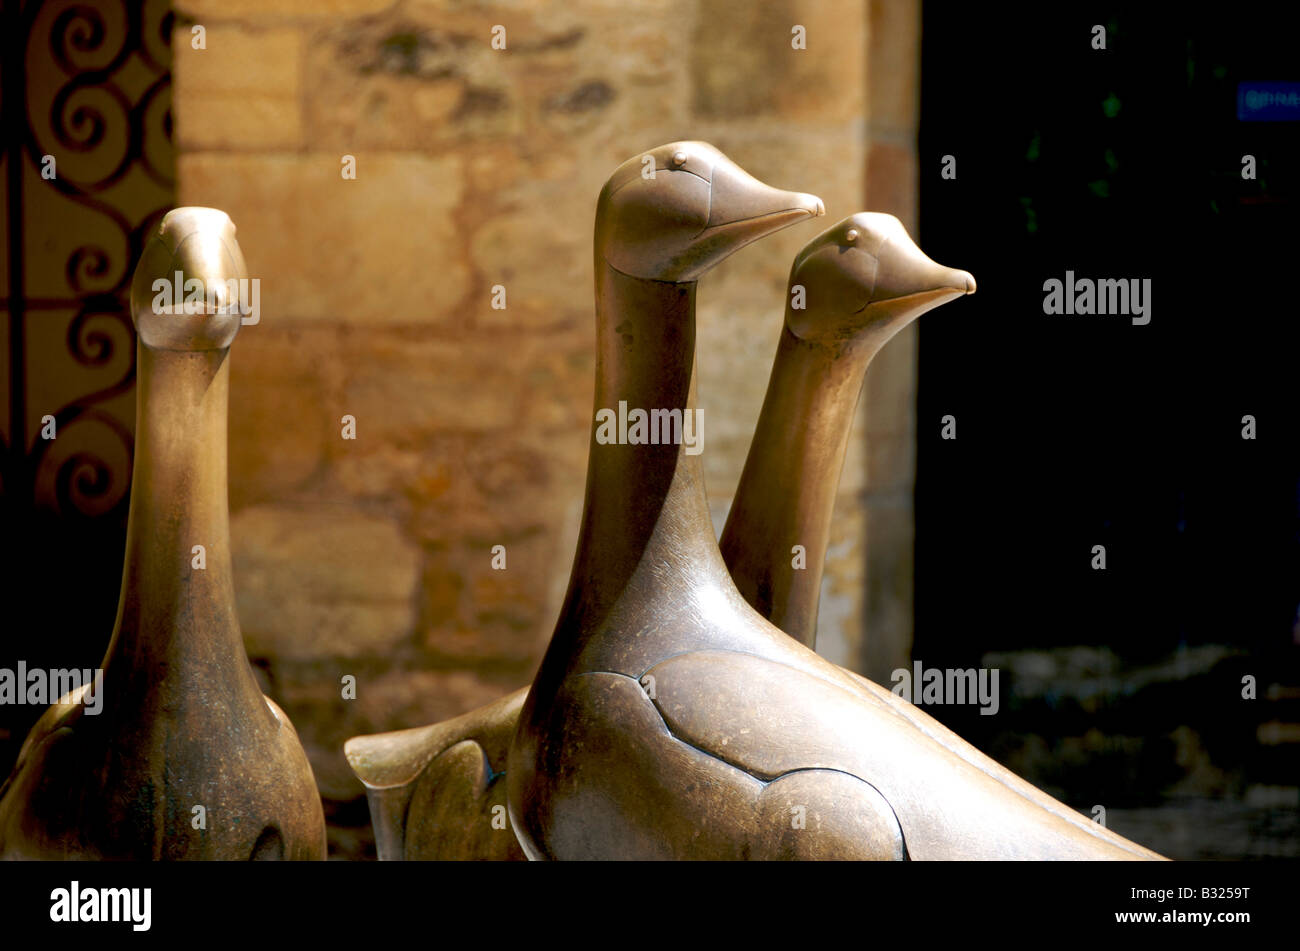 Bronze sculpture of three geese in Place aux Oies, Sarlat la Caneda, Dordogne, France Stock Photo